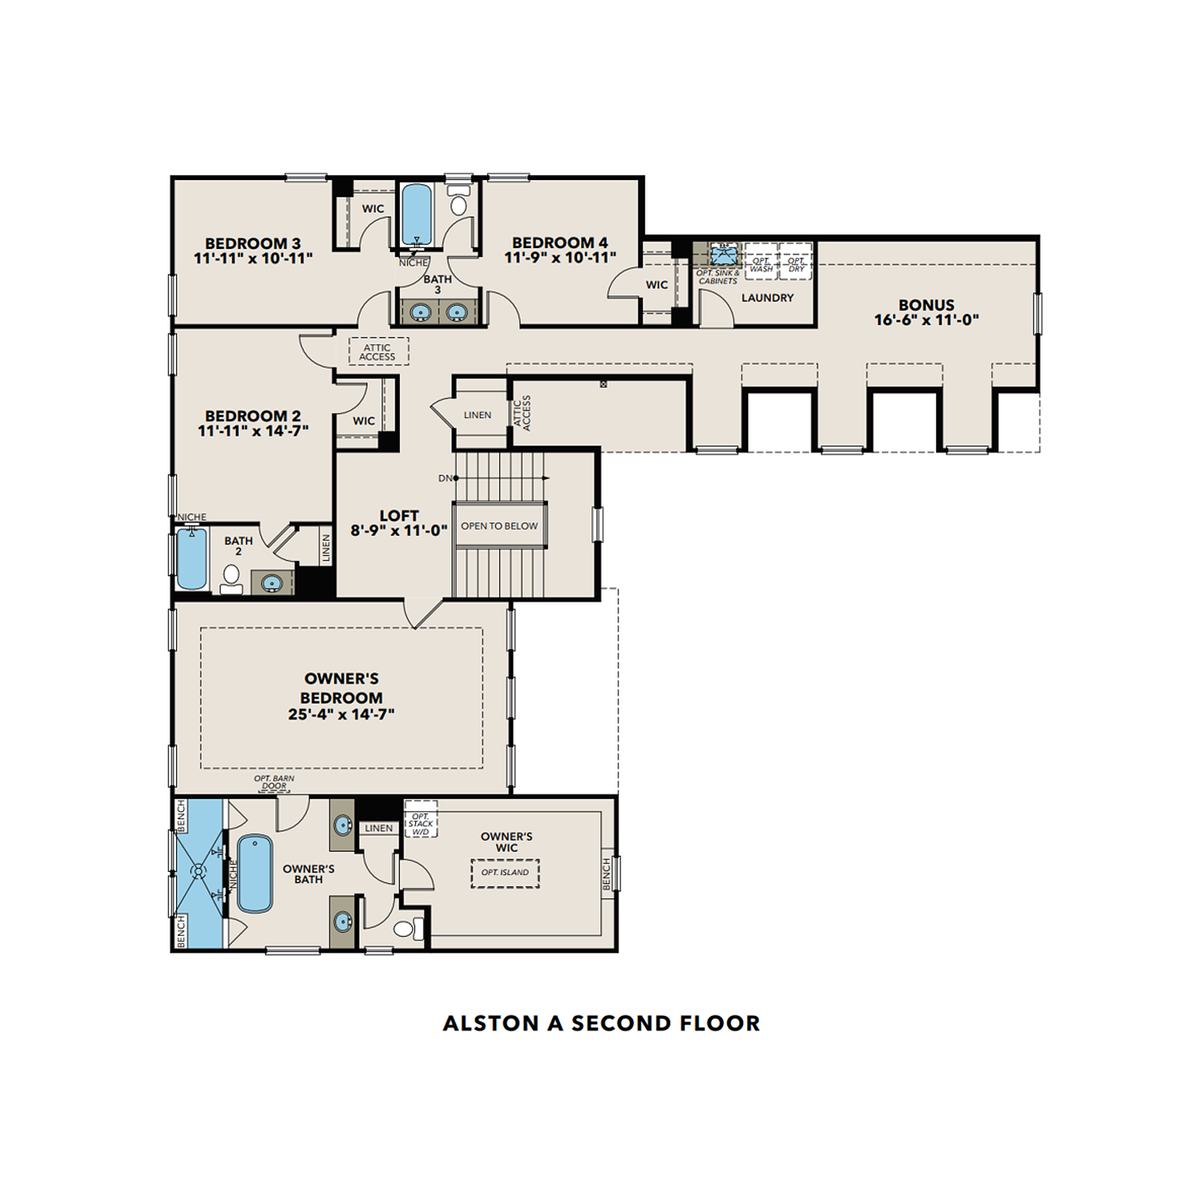 2 - The Alston A buildable floor plan layout in Davidson Homes' Tanglewood community.